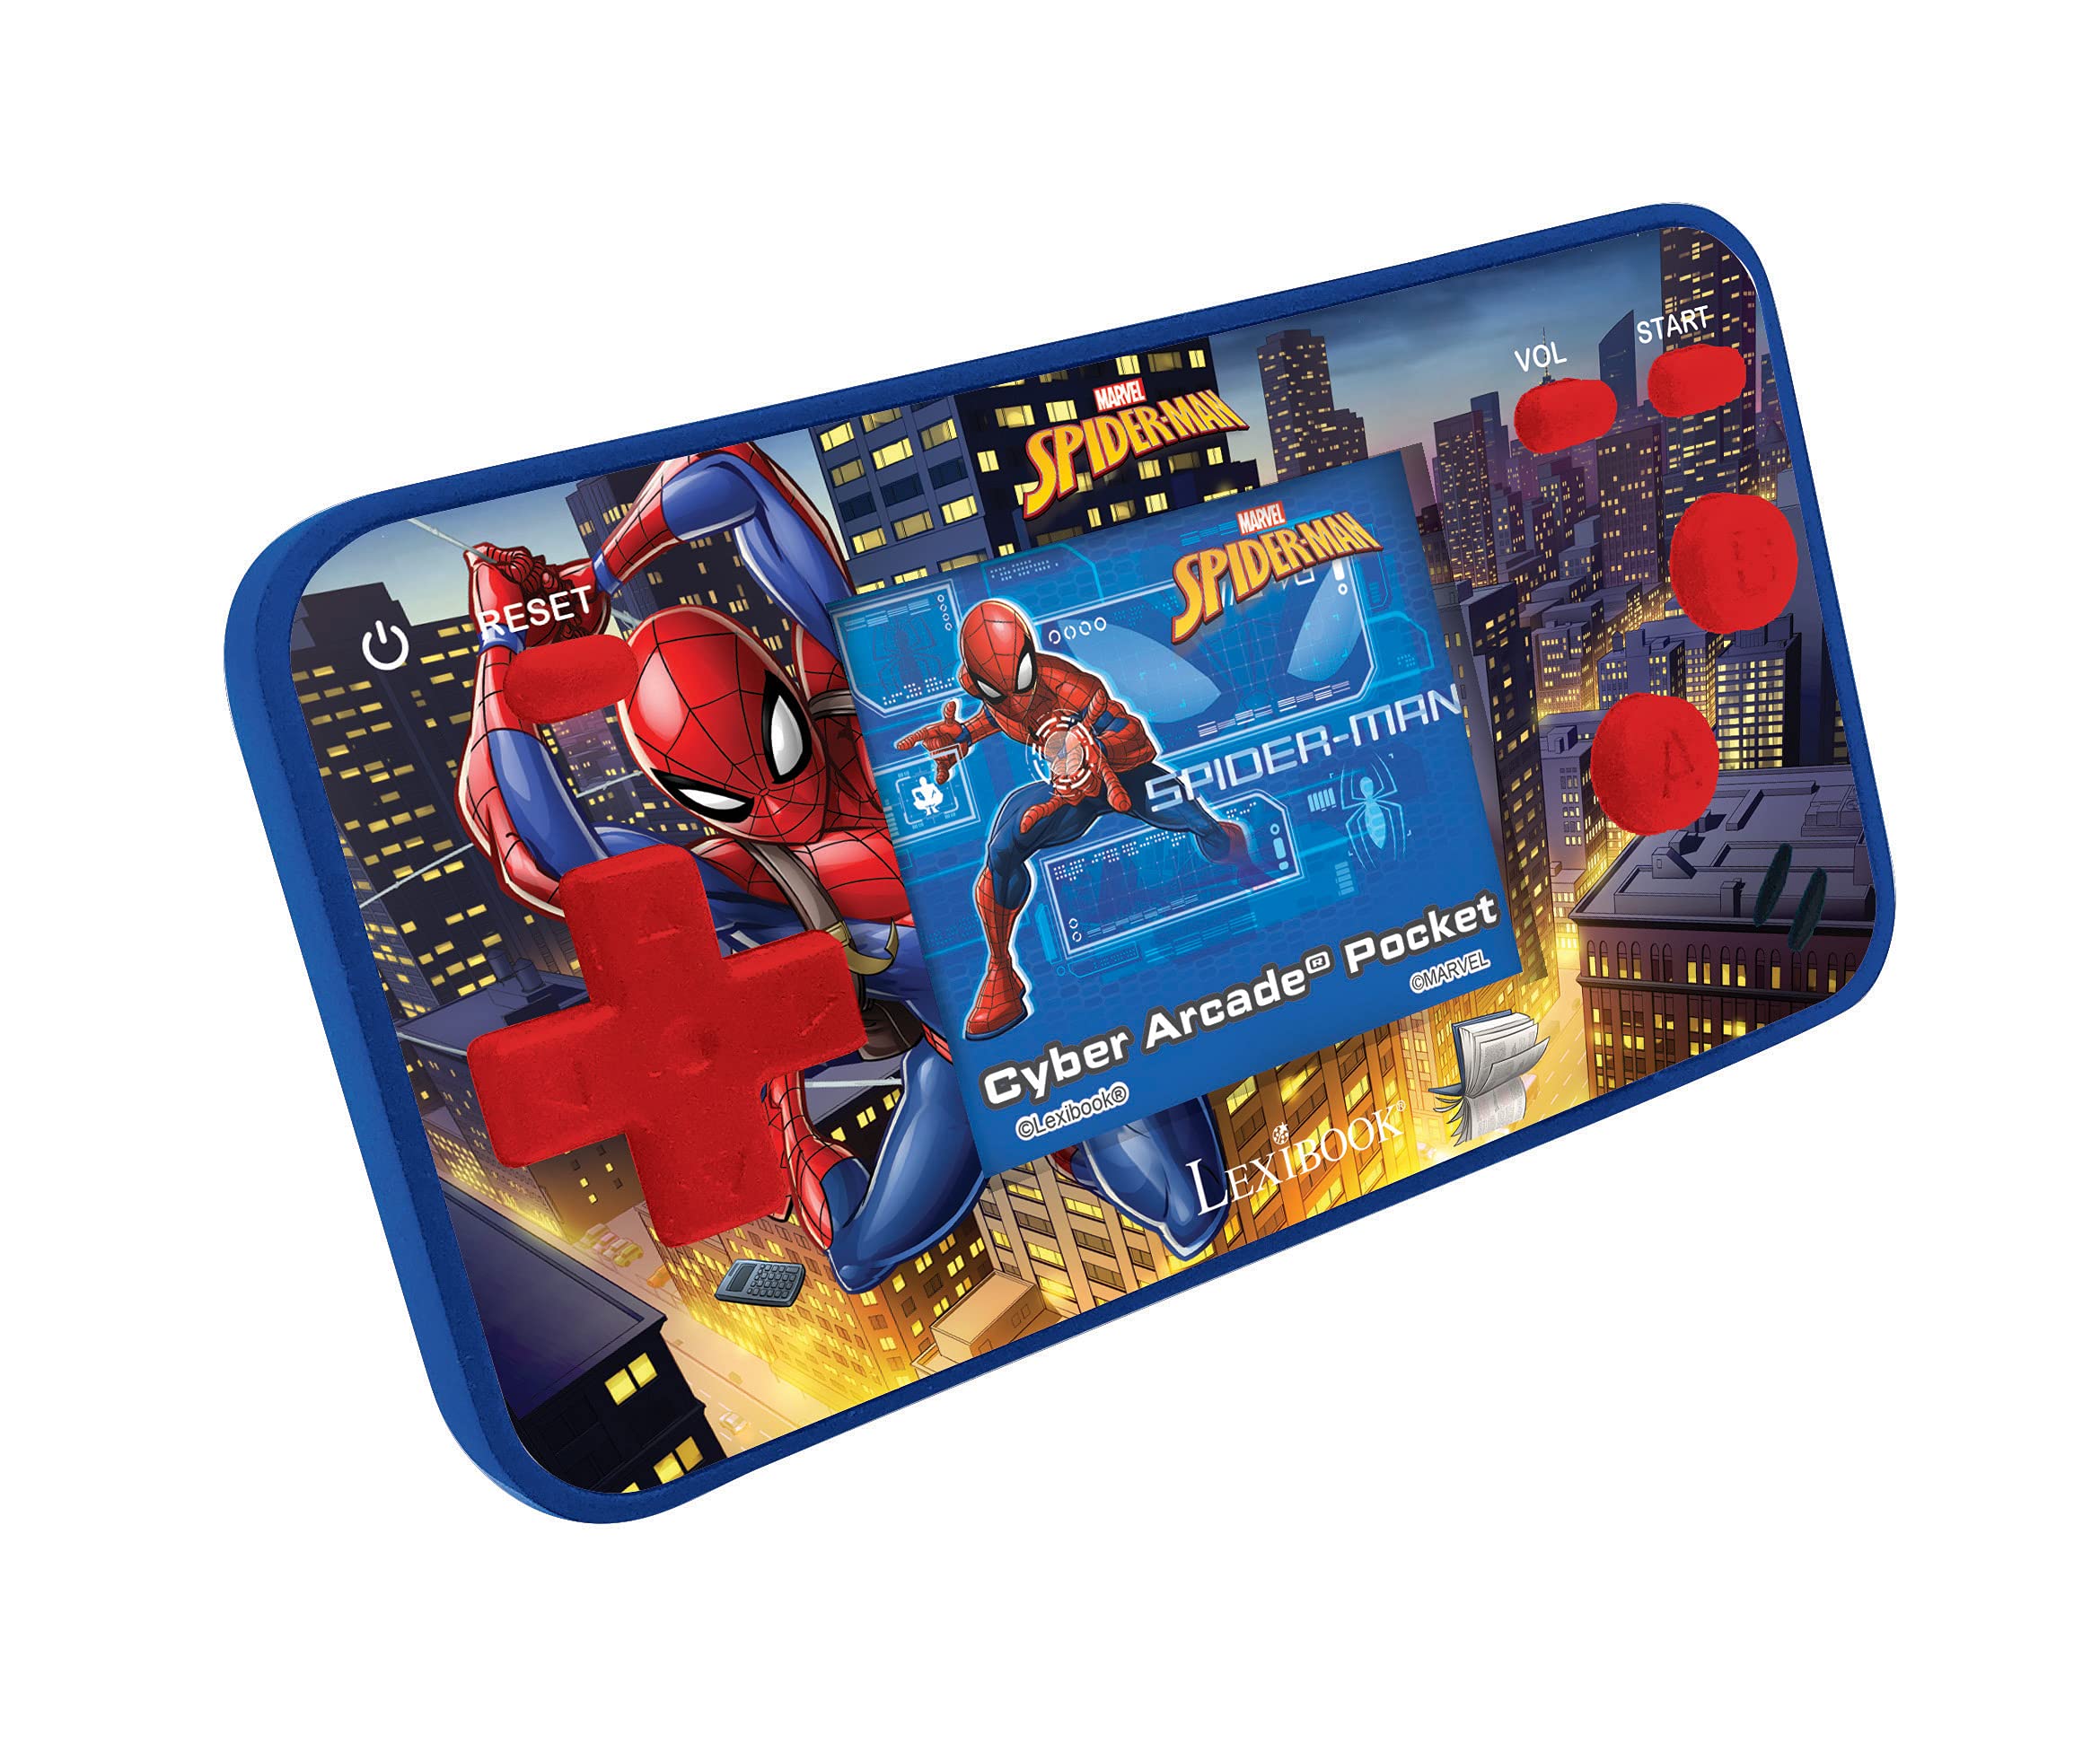 LEXiBOOK Spider-Man Cyber Arcade Pocket Game Console, 150 Games, LCD Screen, Battery Operated, red/Blue, JL1895SP